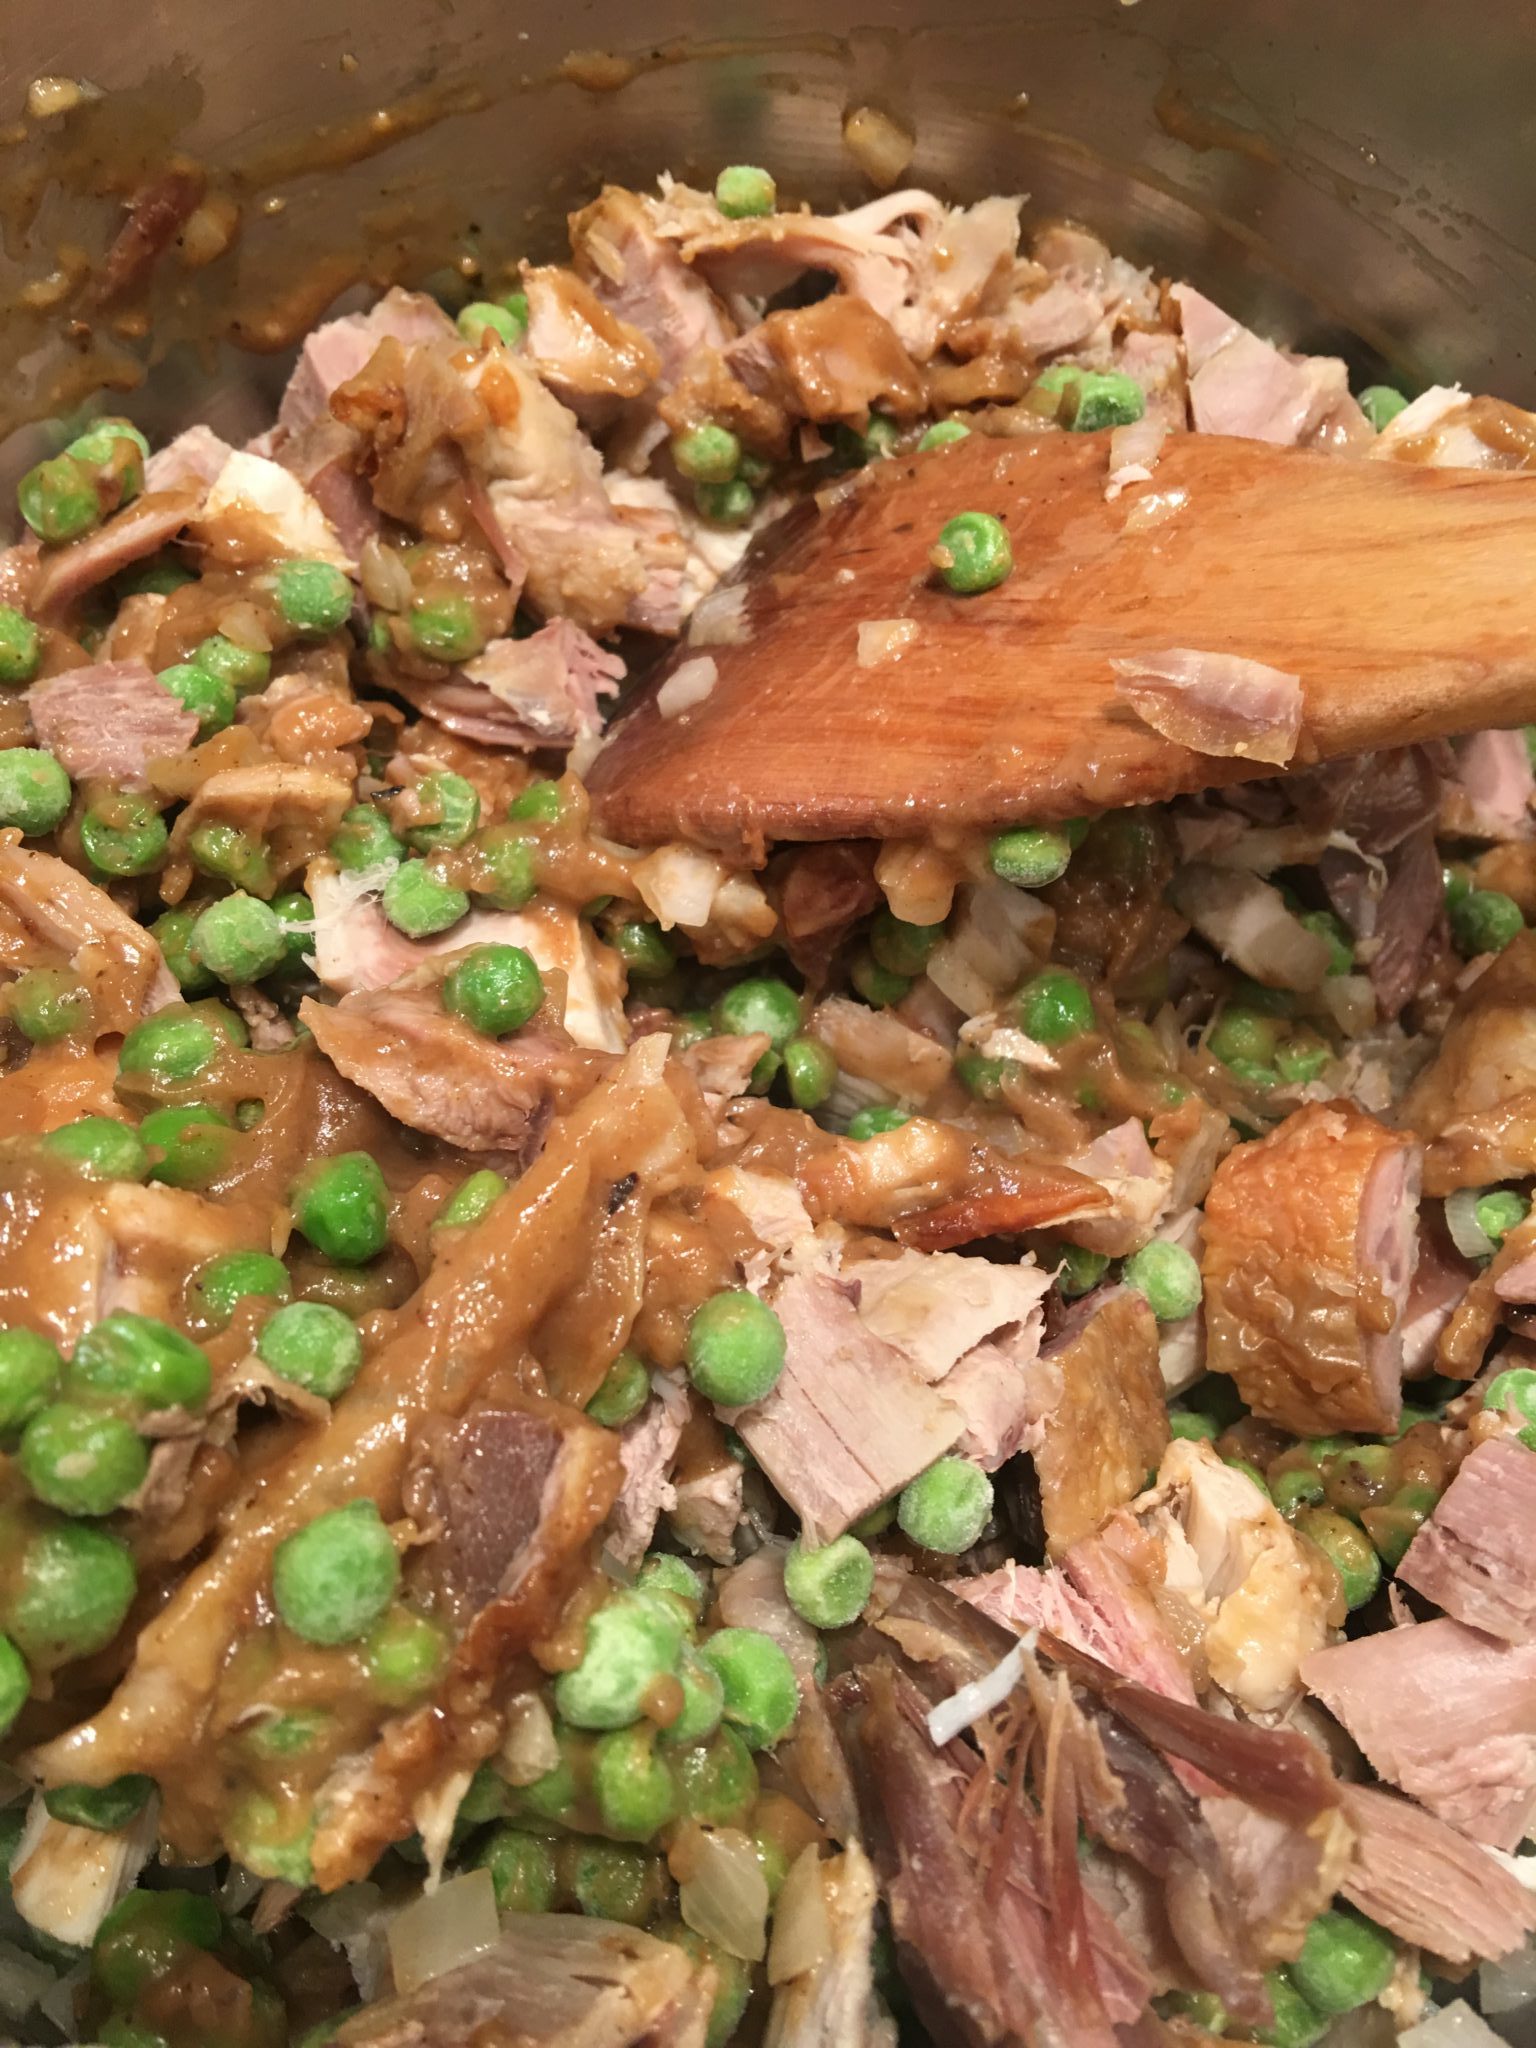 Peas, turkey meat and gravy in a pot